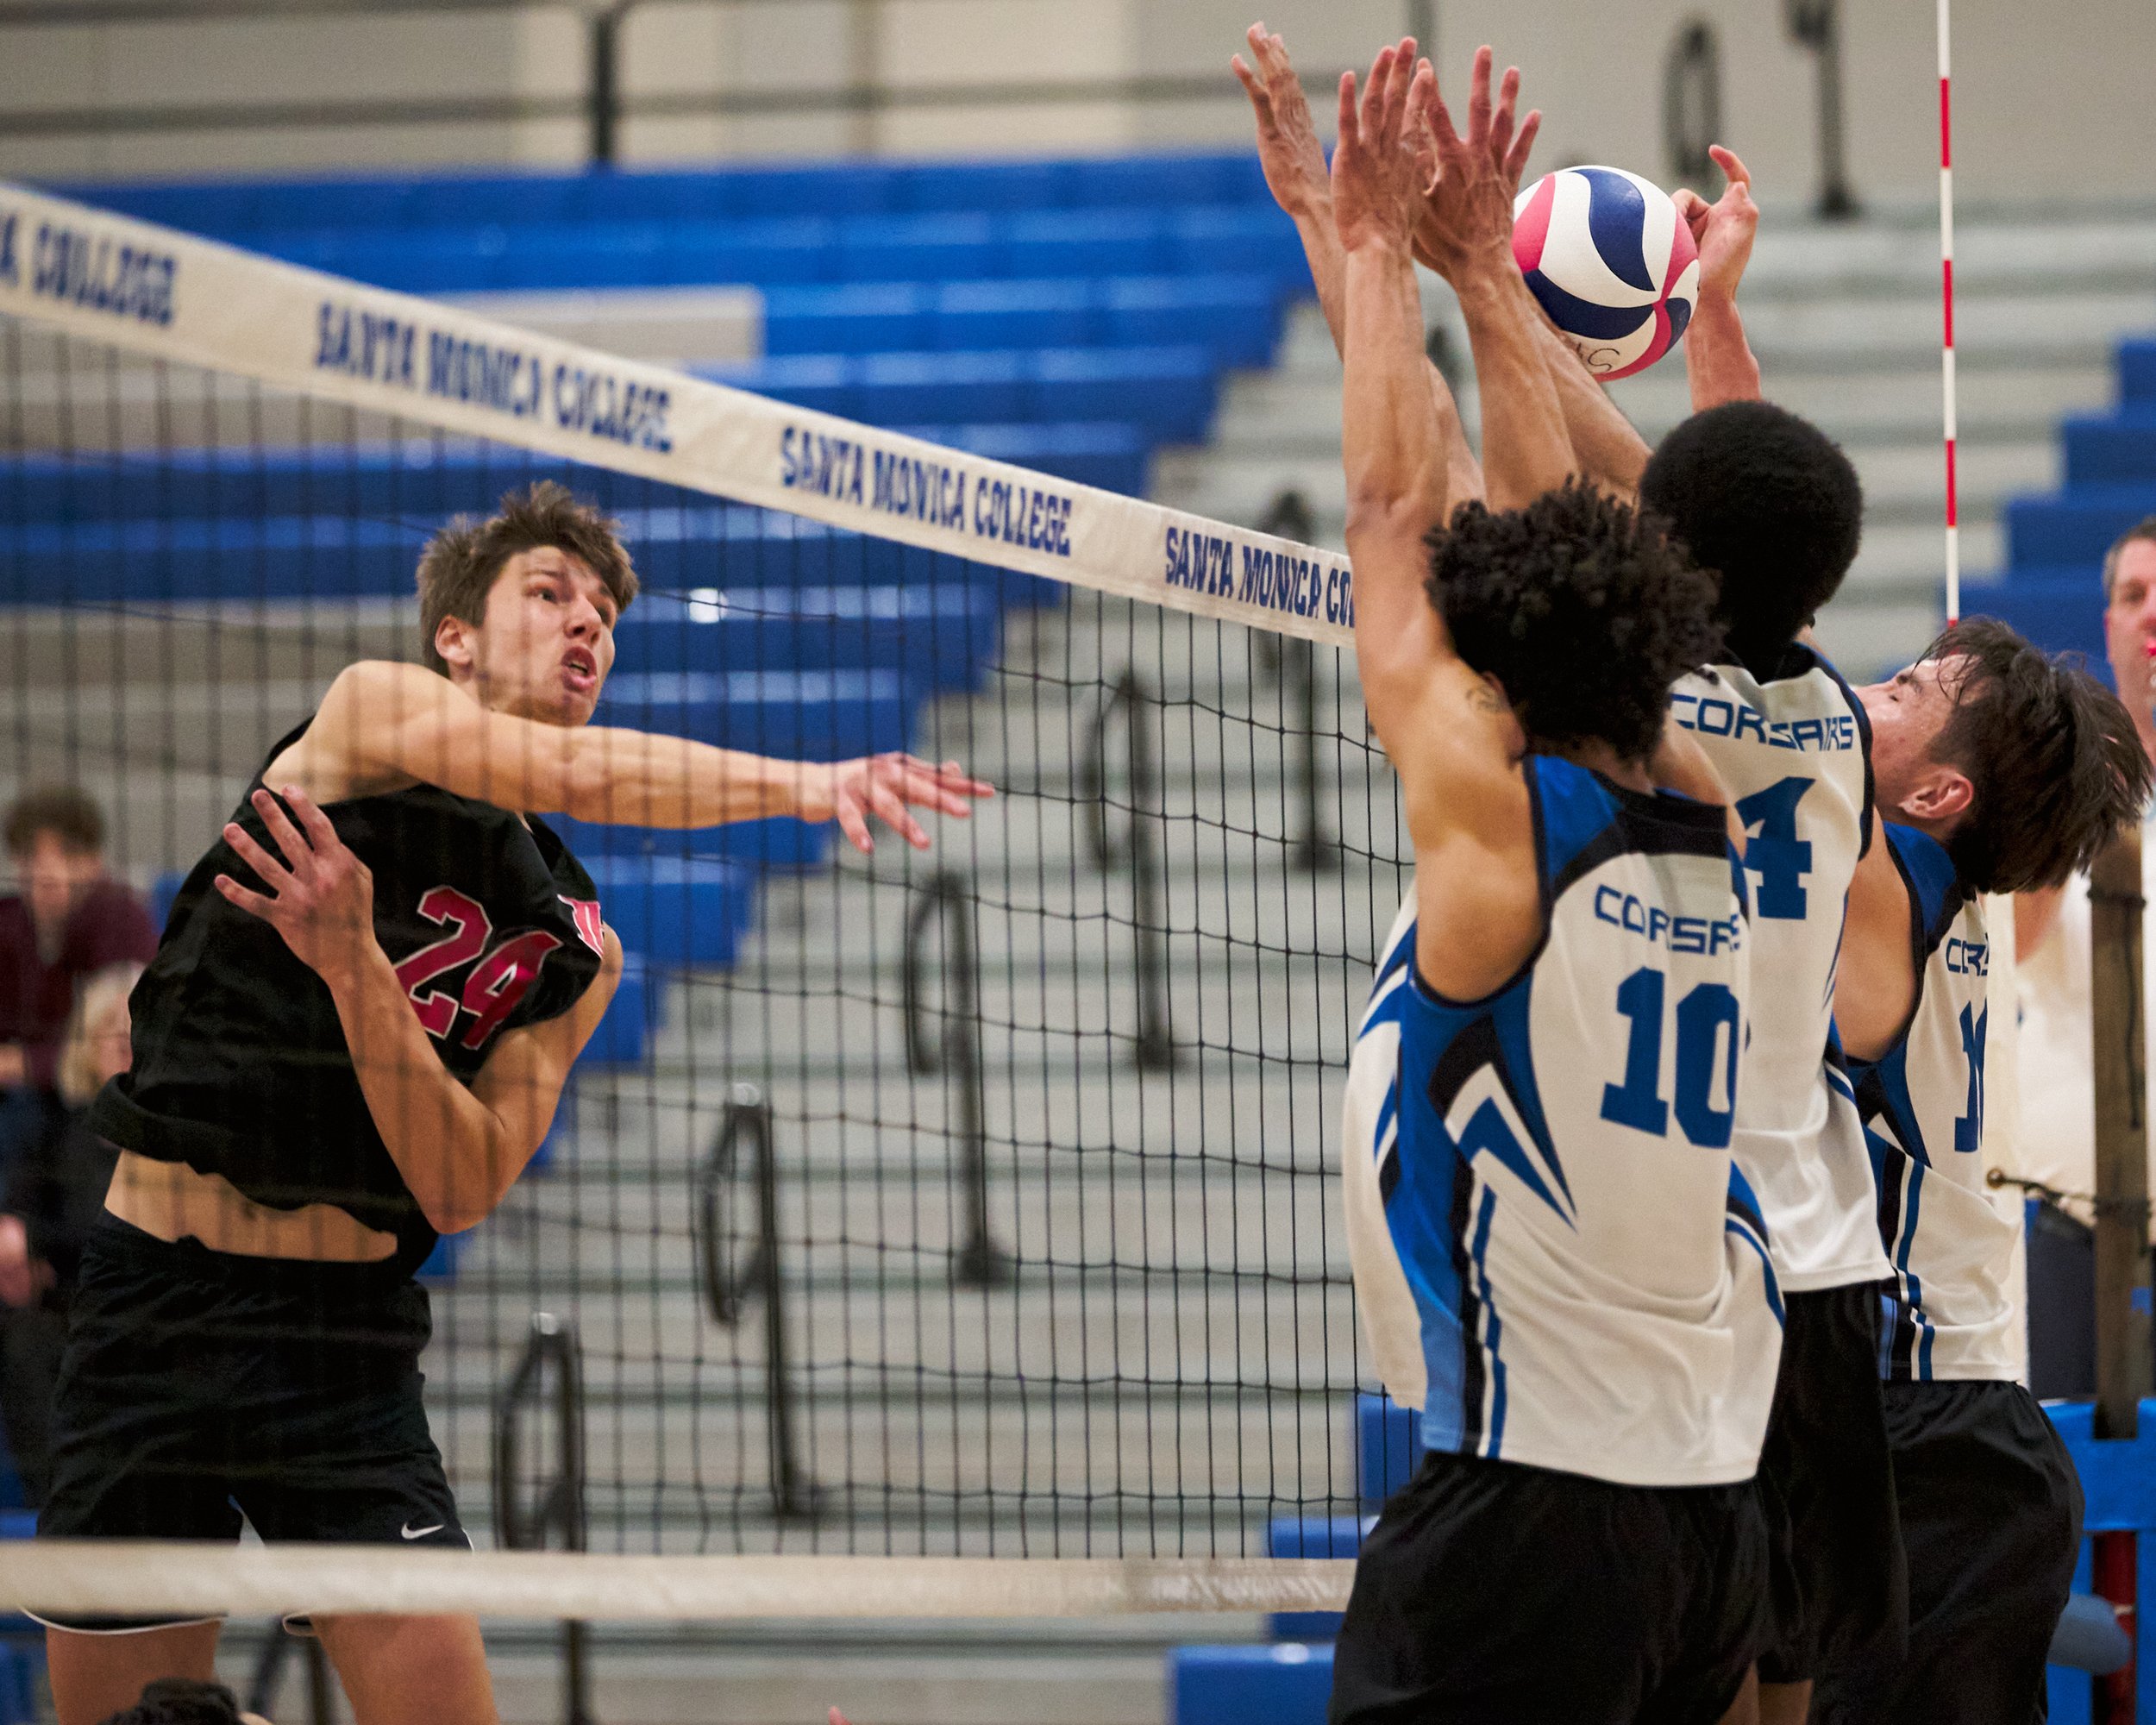  Long Beach City College Vikings' Cole Oliver hits the ball past Santa Monica College Corsairs' Nate Davis, Beikwaw Yankey, and Enkhtur Tserendavaa during the men's volleyball match on Friday, March 4, 2023, at Corsair Gym in Santa Monica, Calif. The